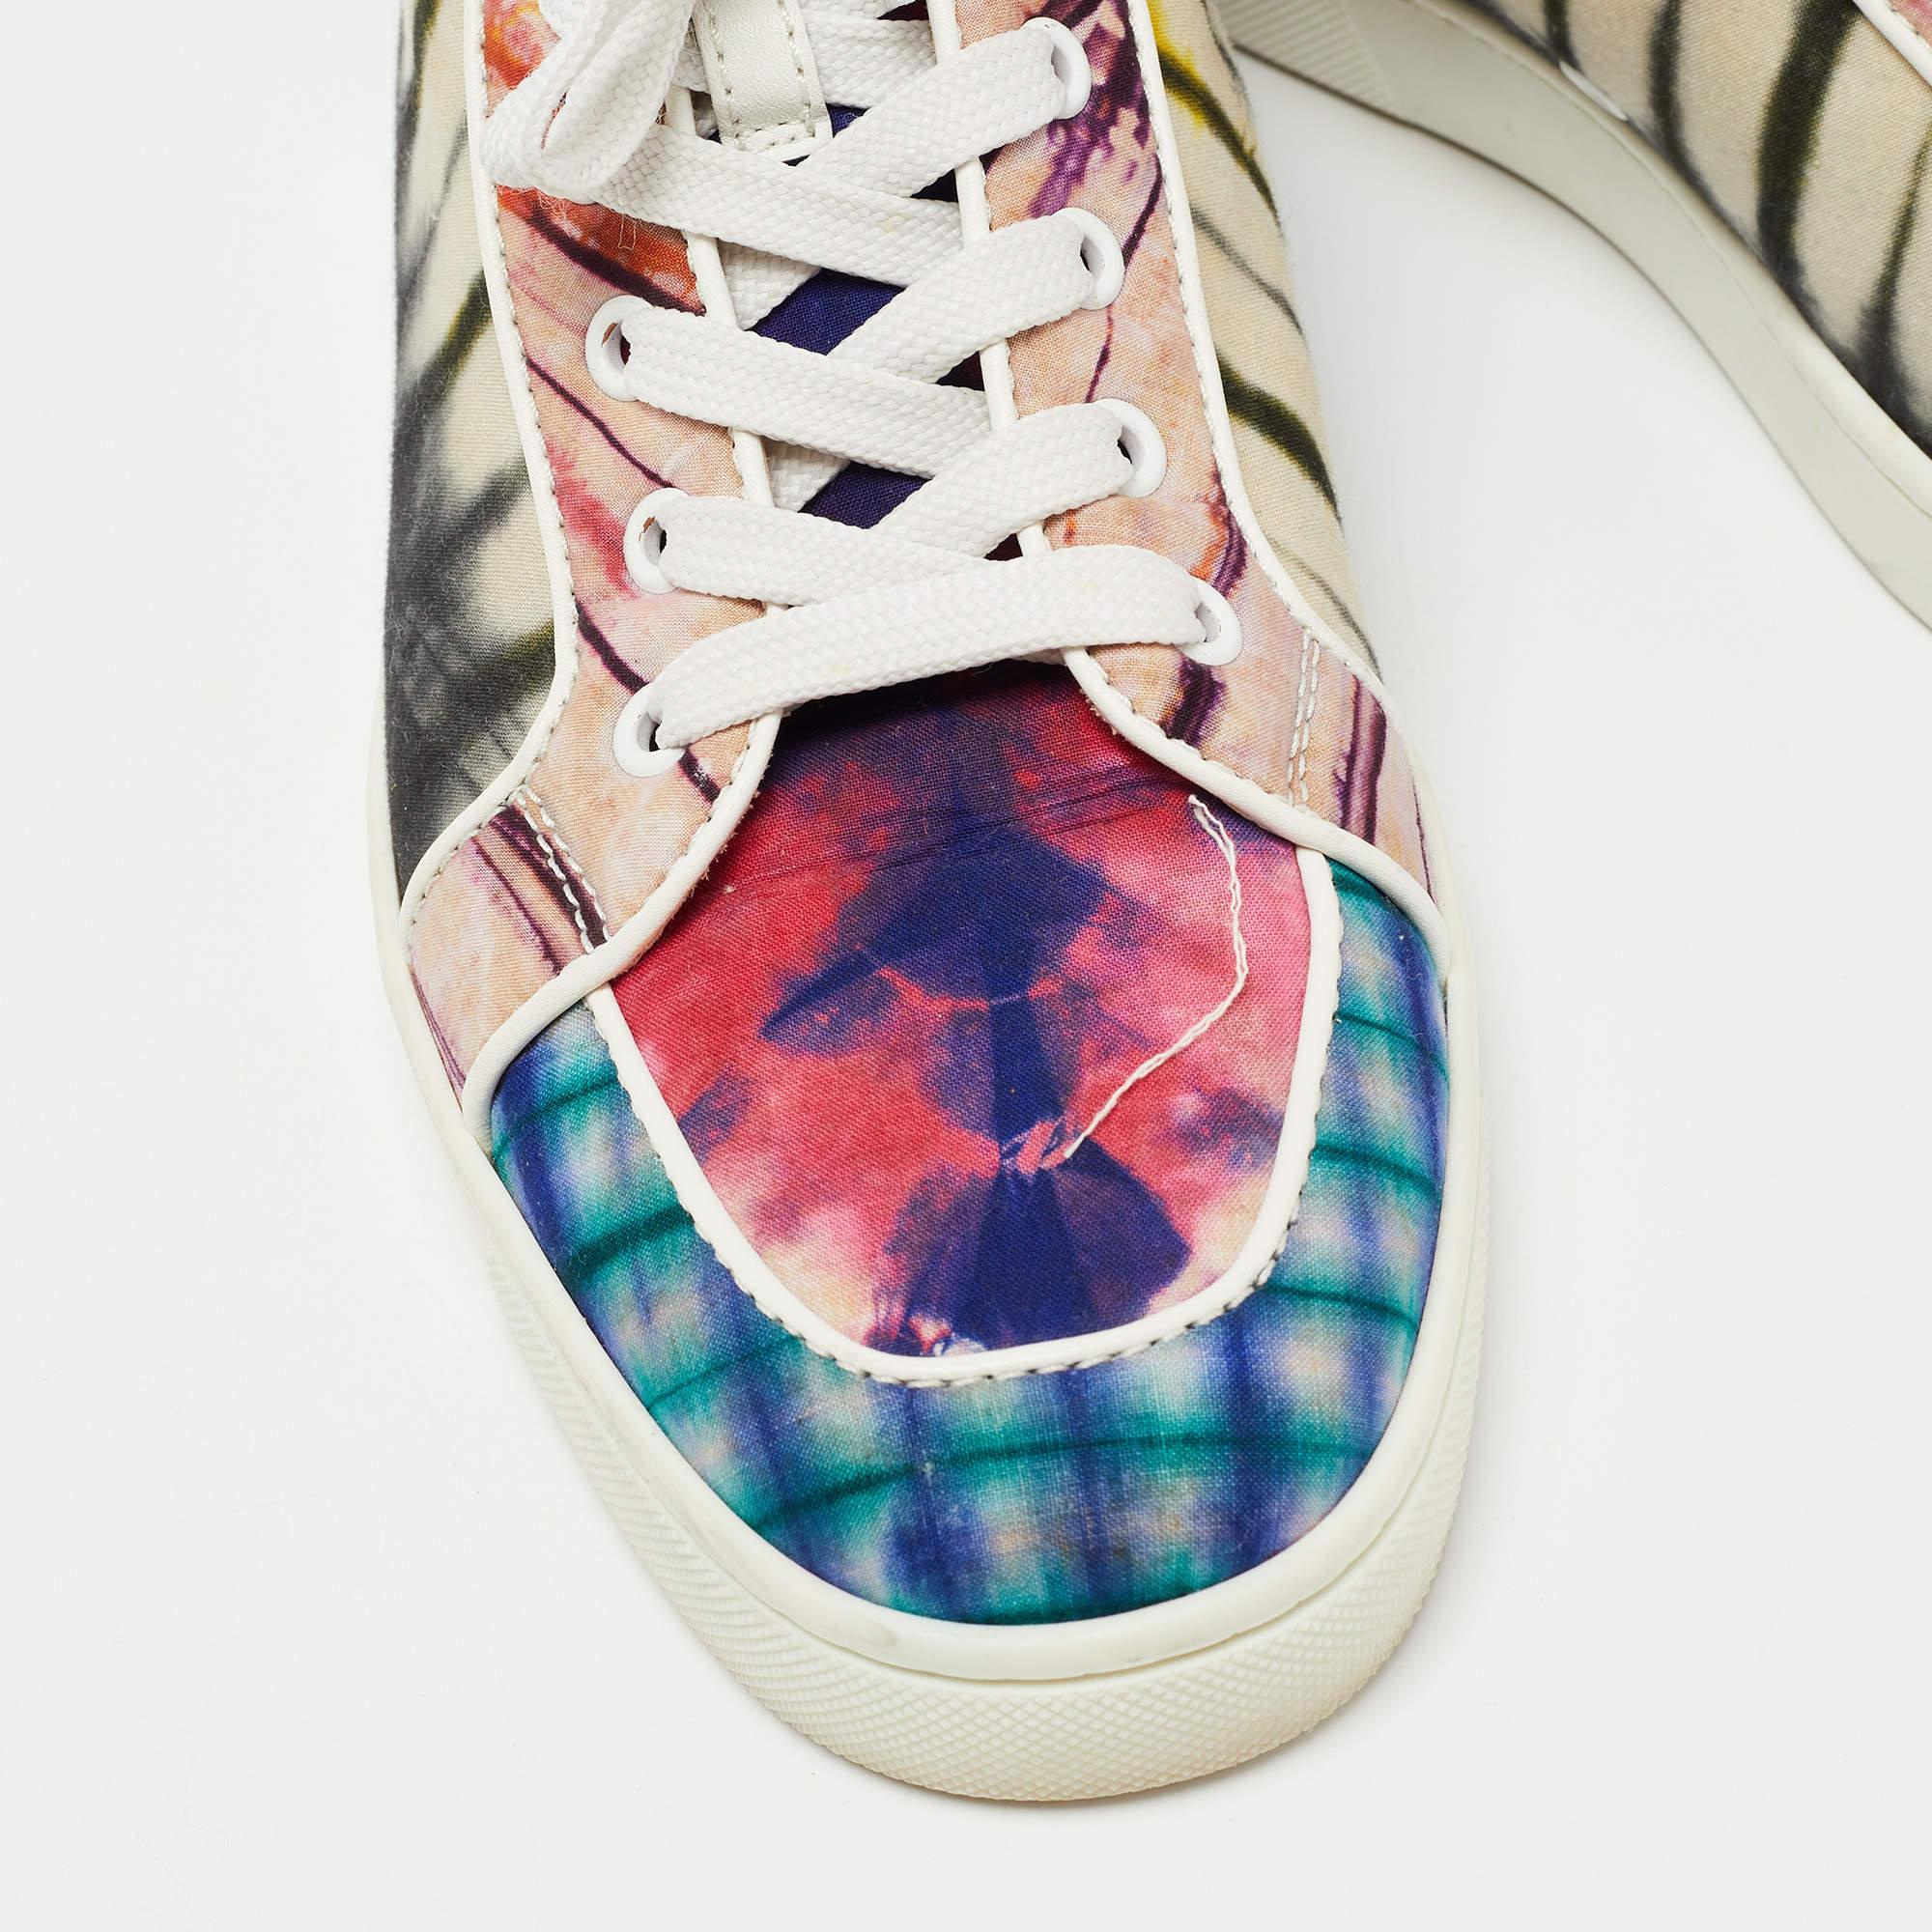 Christian Louboutin Multicolor Fabric Tie Dye High Top Sneakers Size 39.5 For Sale 1